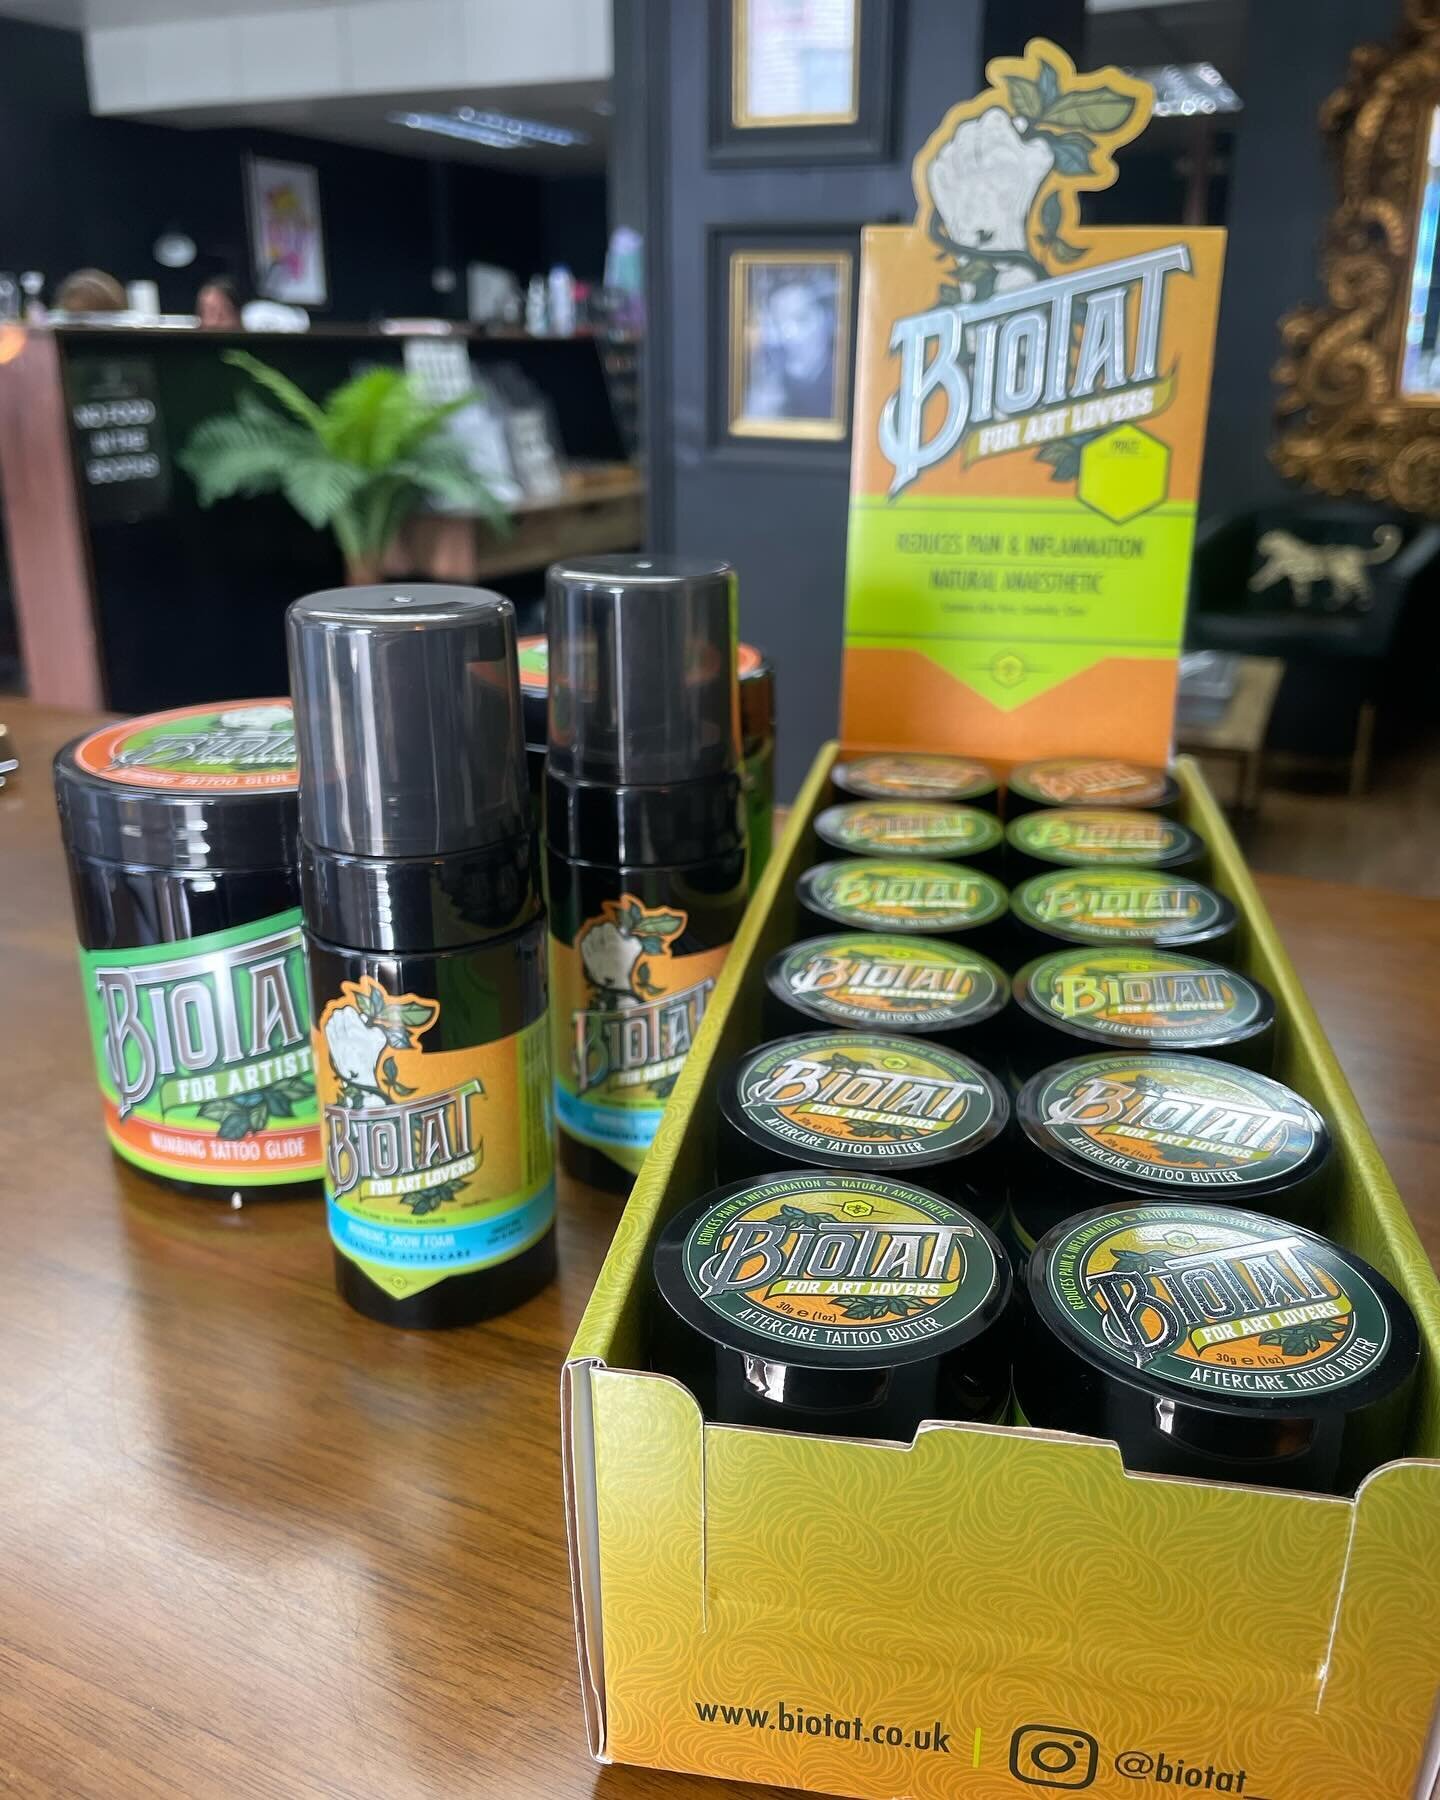 Got your tattoo covered from start to finish! The @biotat_ products are such a firm favourite with both our artists and clients - it&rsquo;s been a game changer 

💚Natural numbing with clove oil during the tattoo process 
💚All natural ingredients -